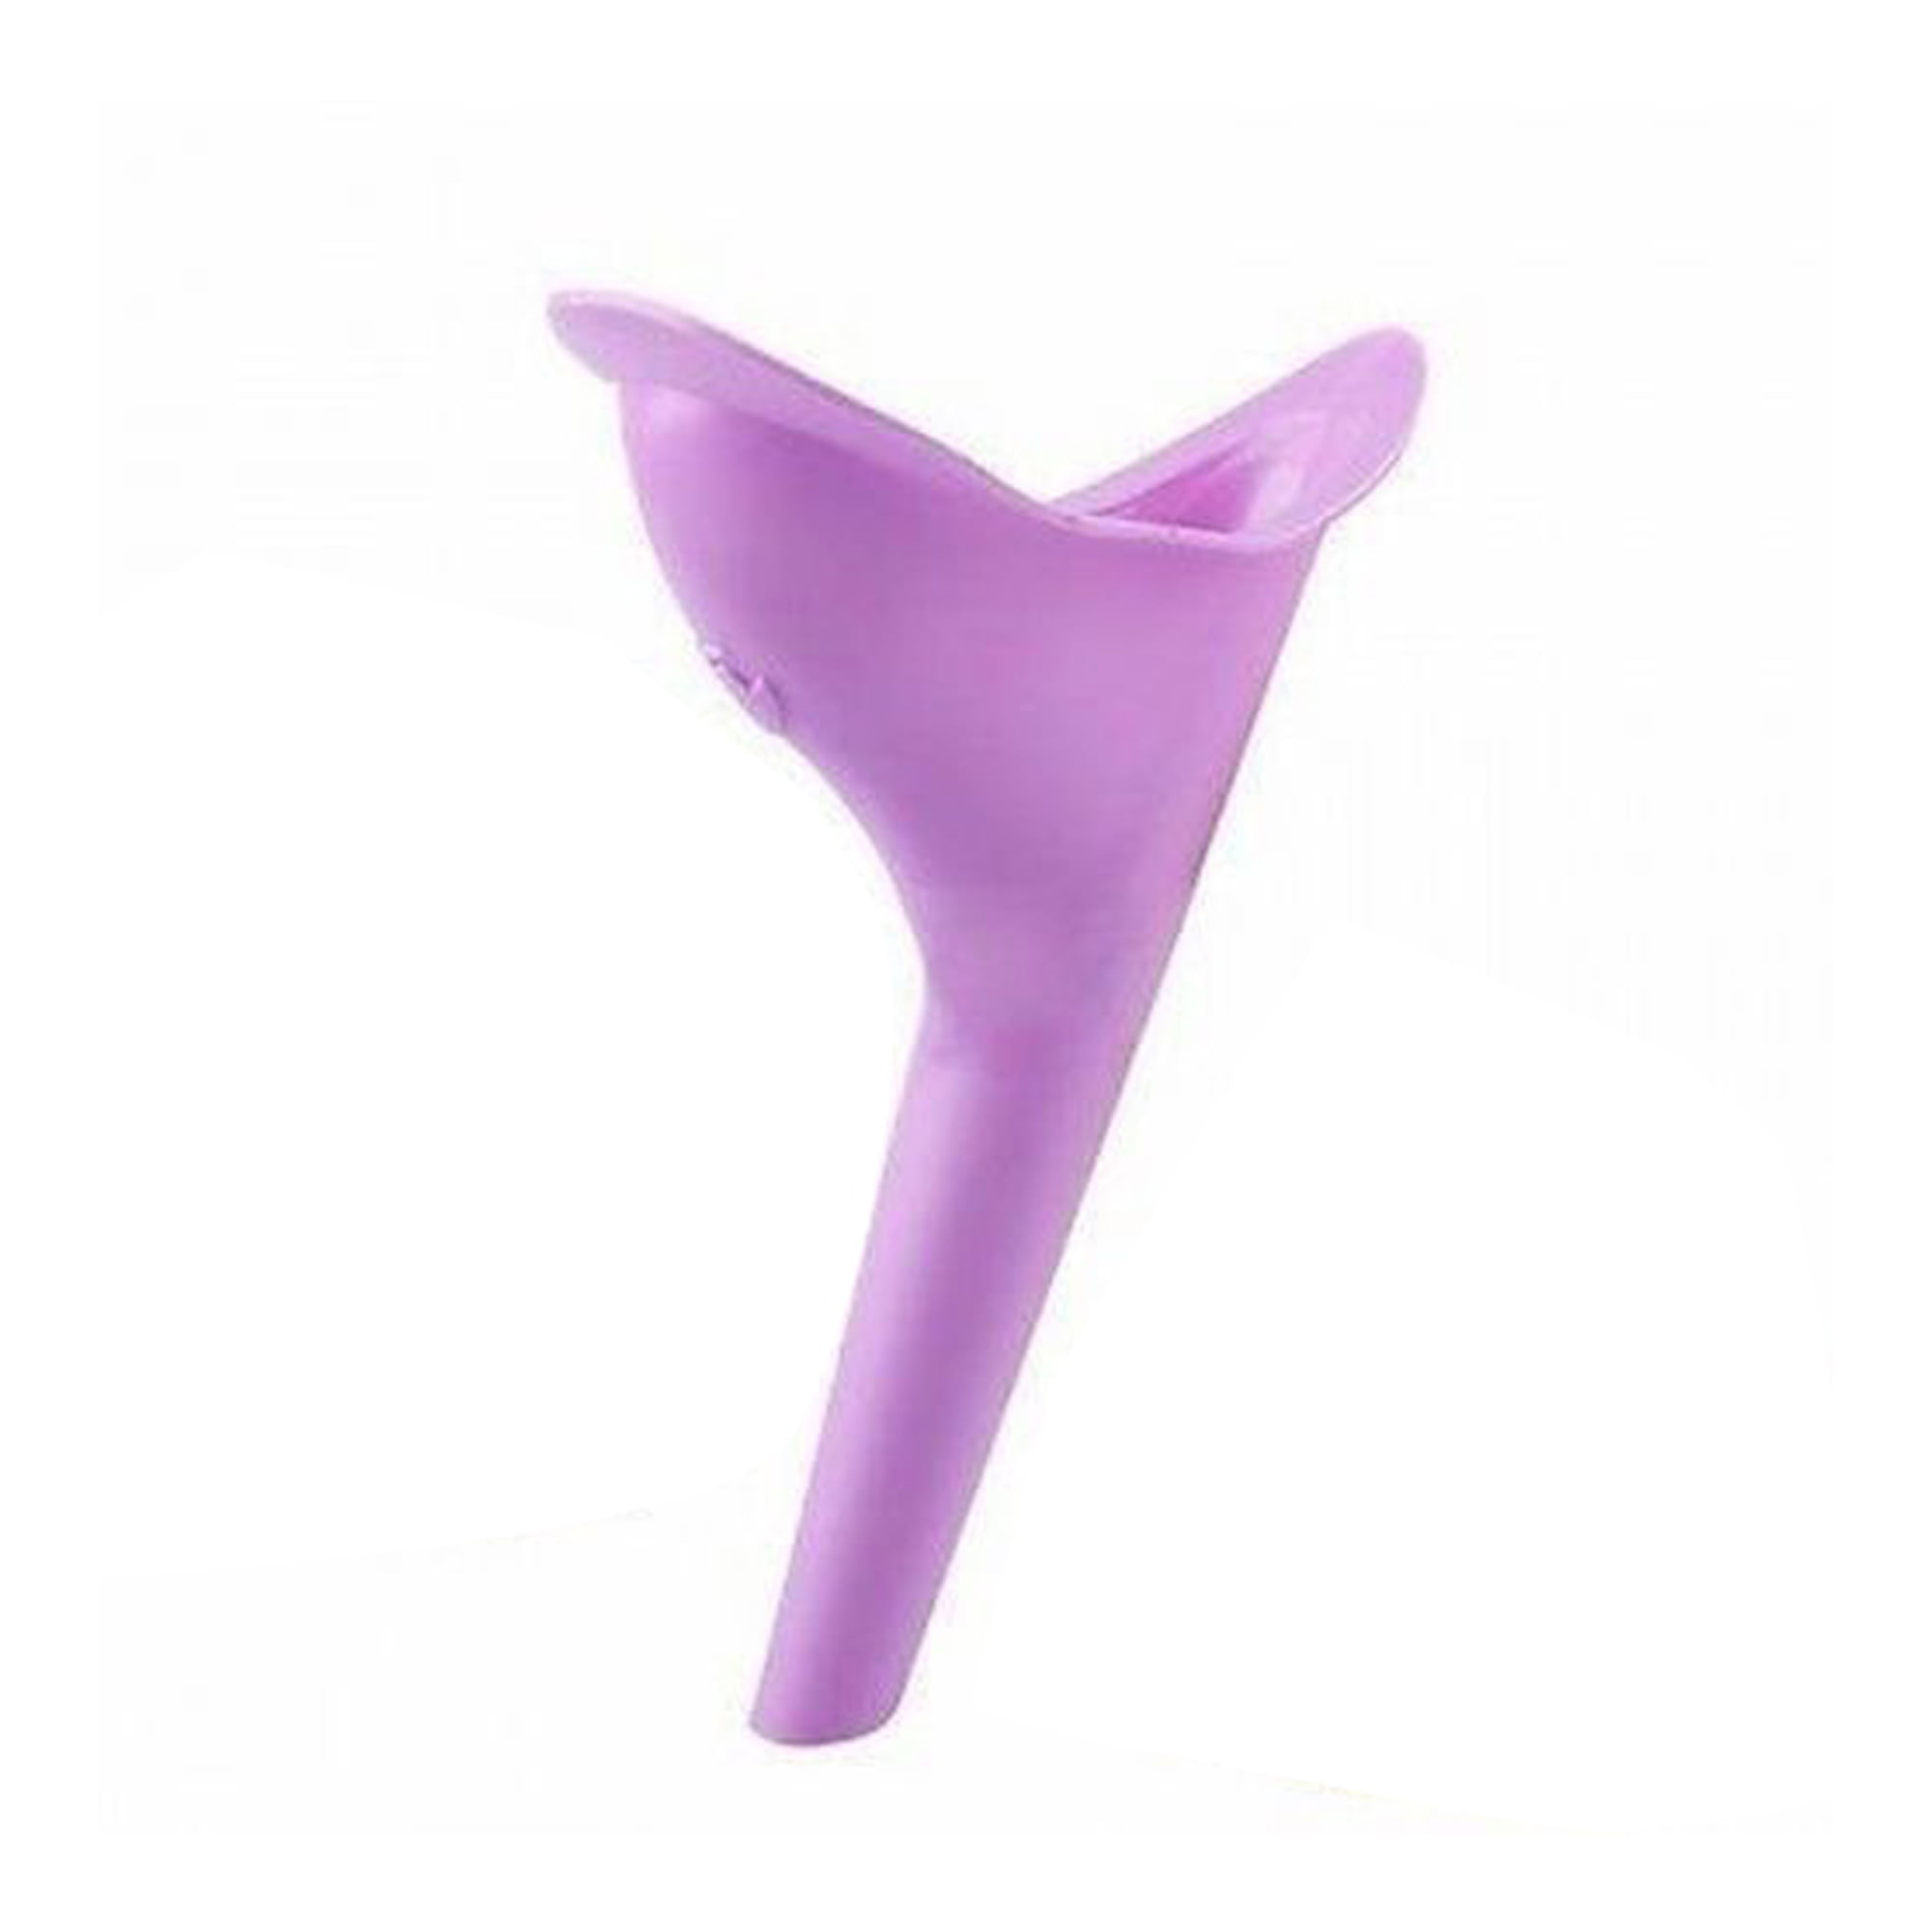 1X Portable Female Ladies Woman She Urinal Urine Wee Funnel Camping Travel Loo 